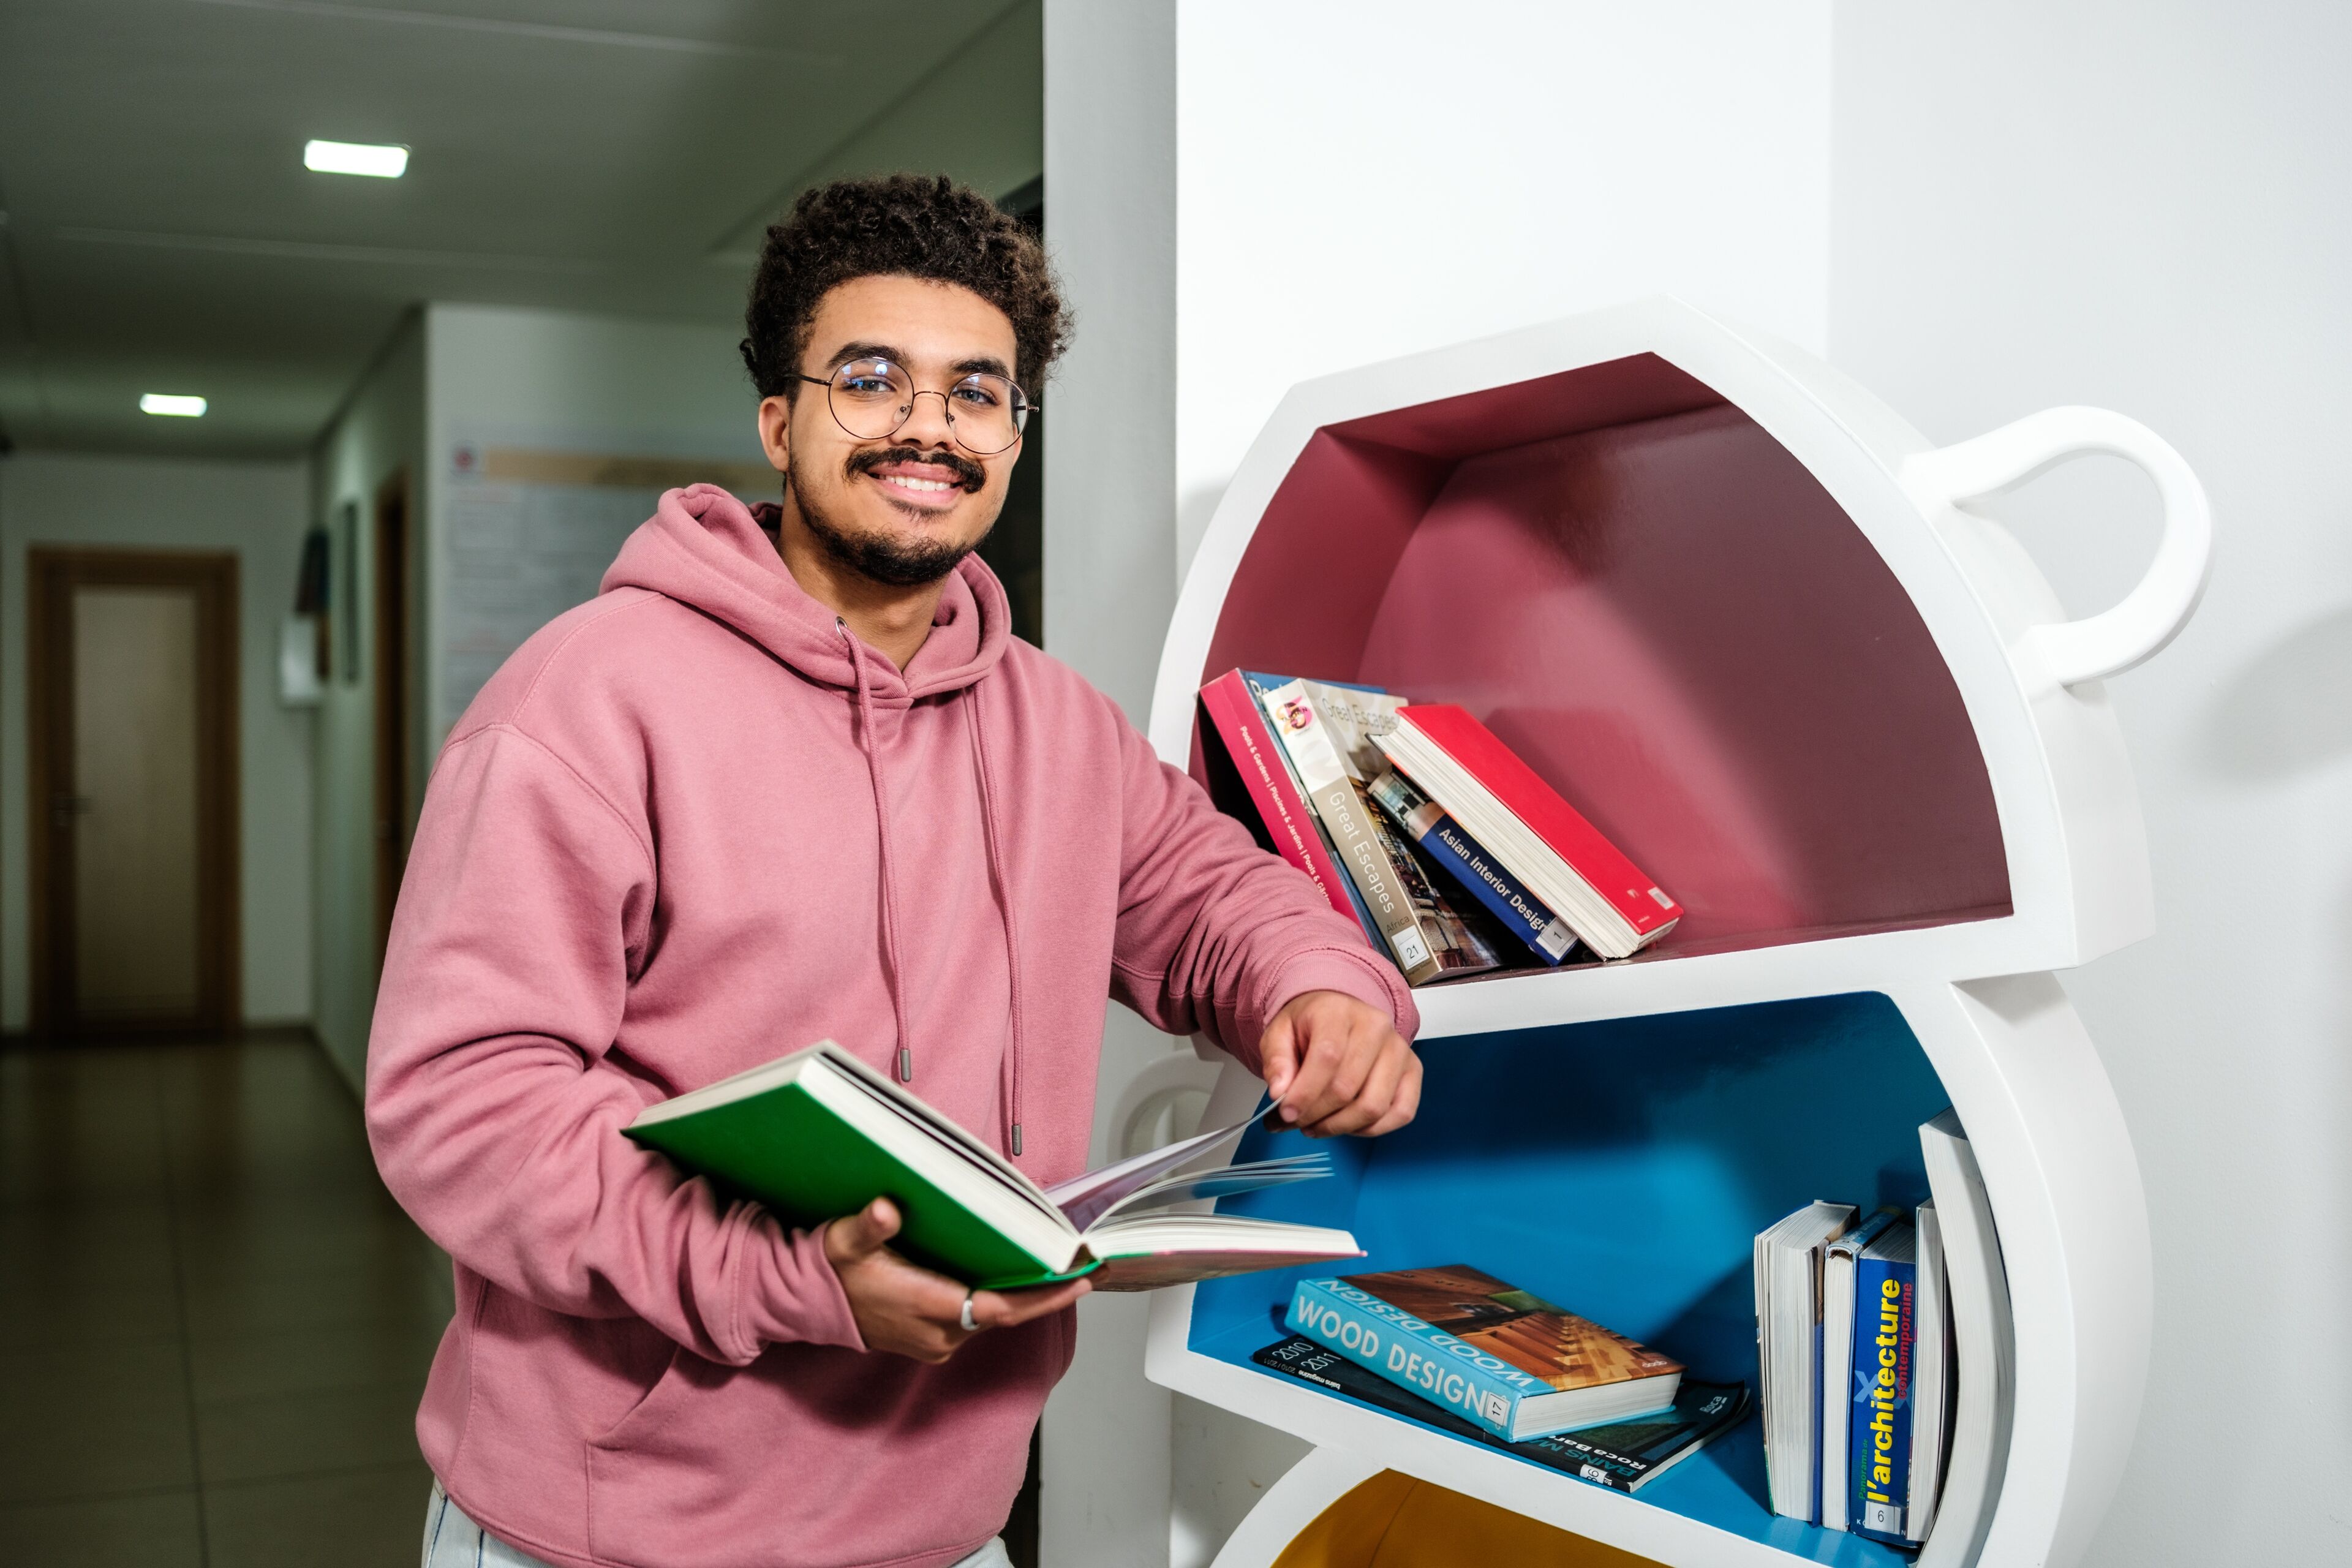 A smiling young man with glasses and a pink hoodie selects a book from a white, cup-shaped bookshelf.